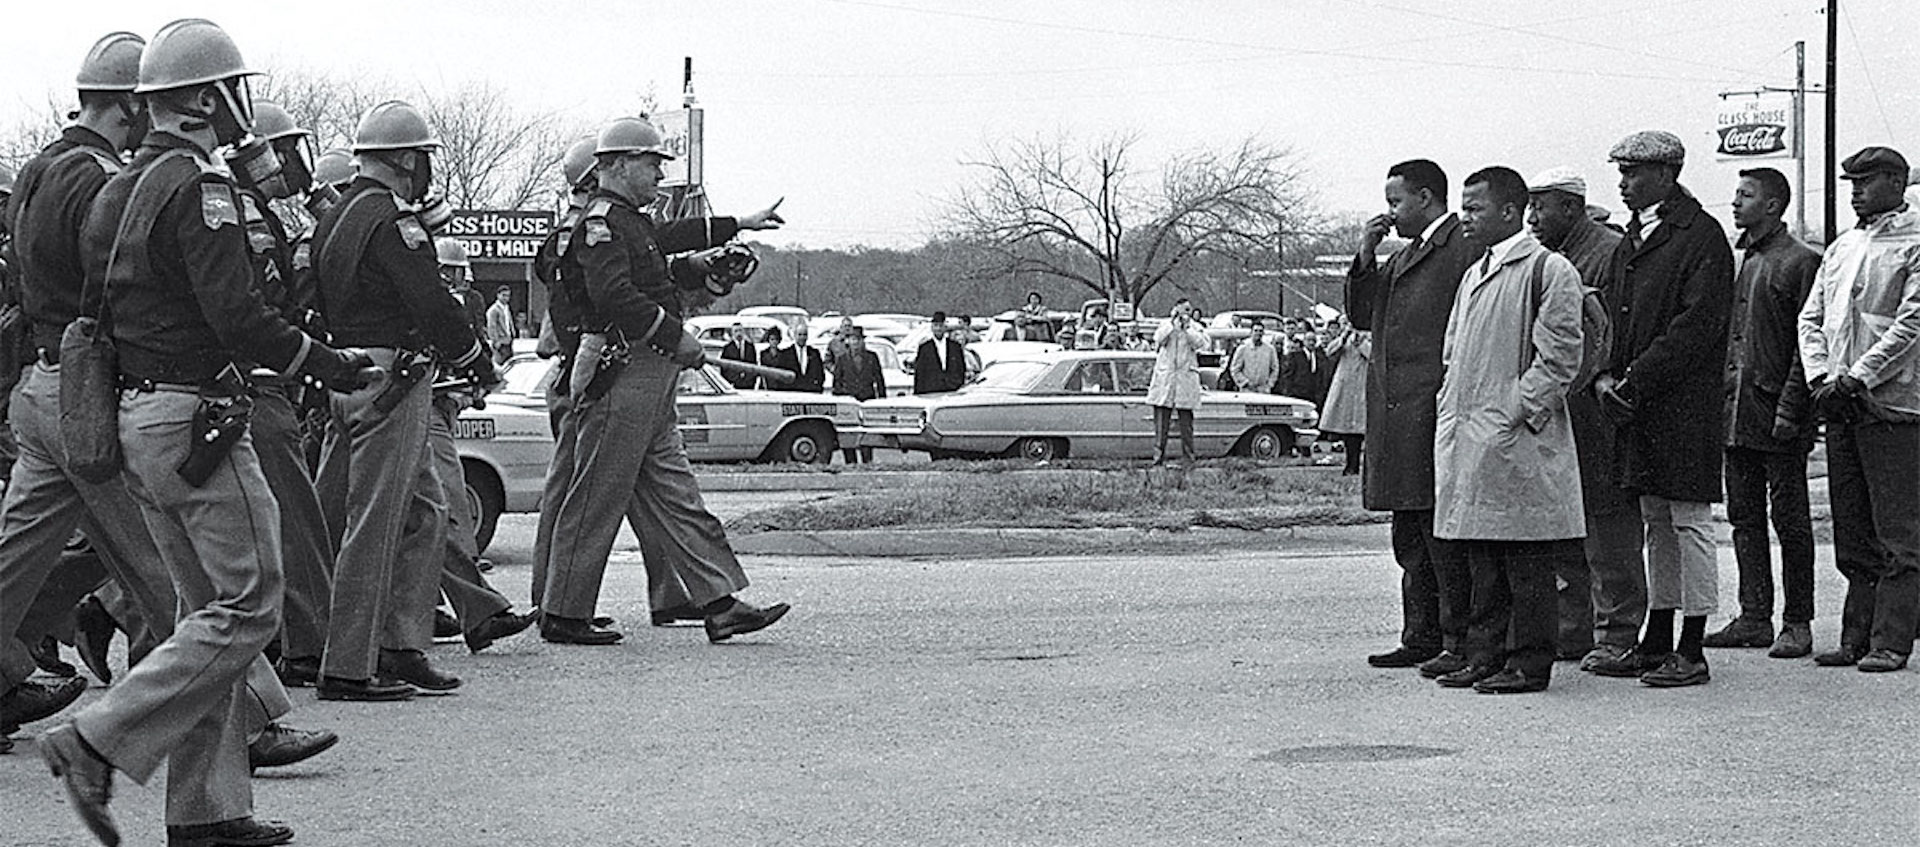 African American protesters face off against police during the Civil Rights Movement in an archive image from the documentary I Am Not Your Negro